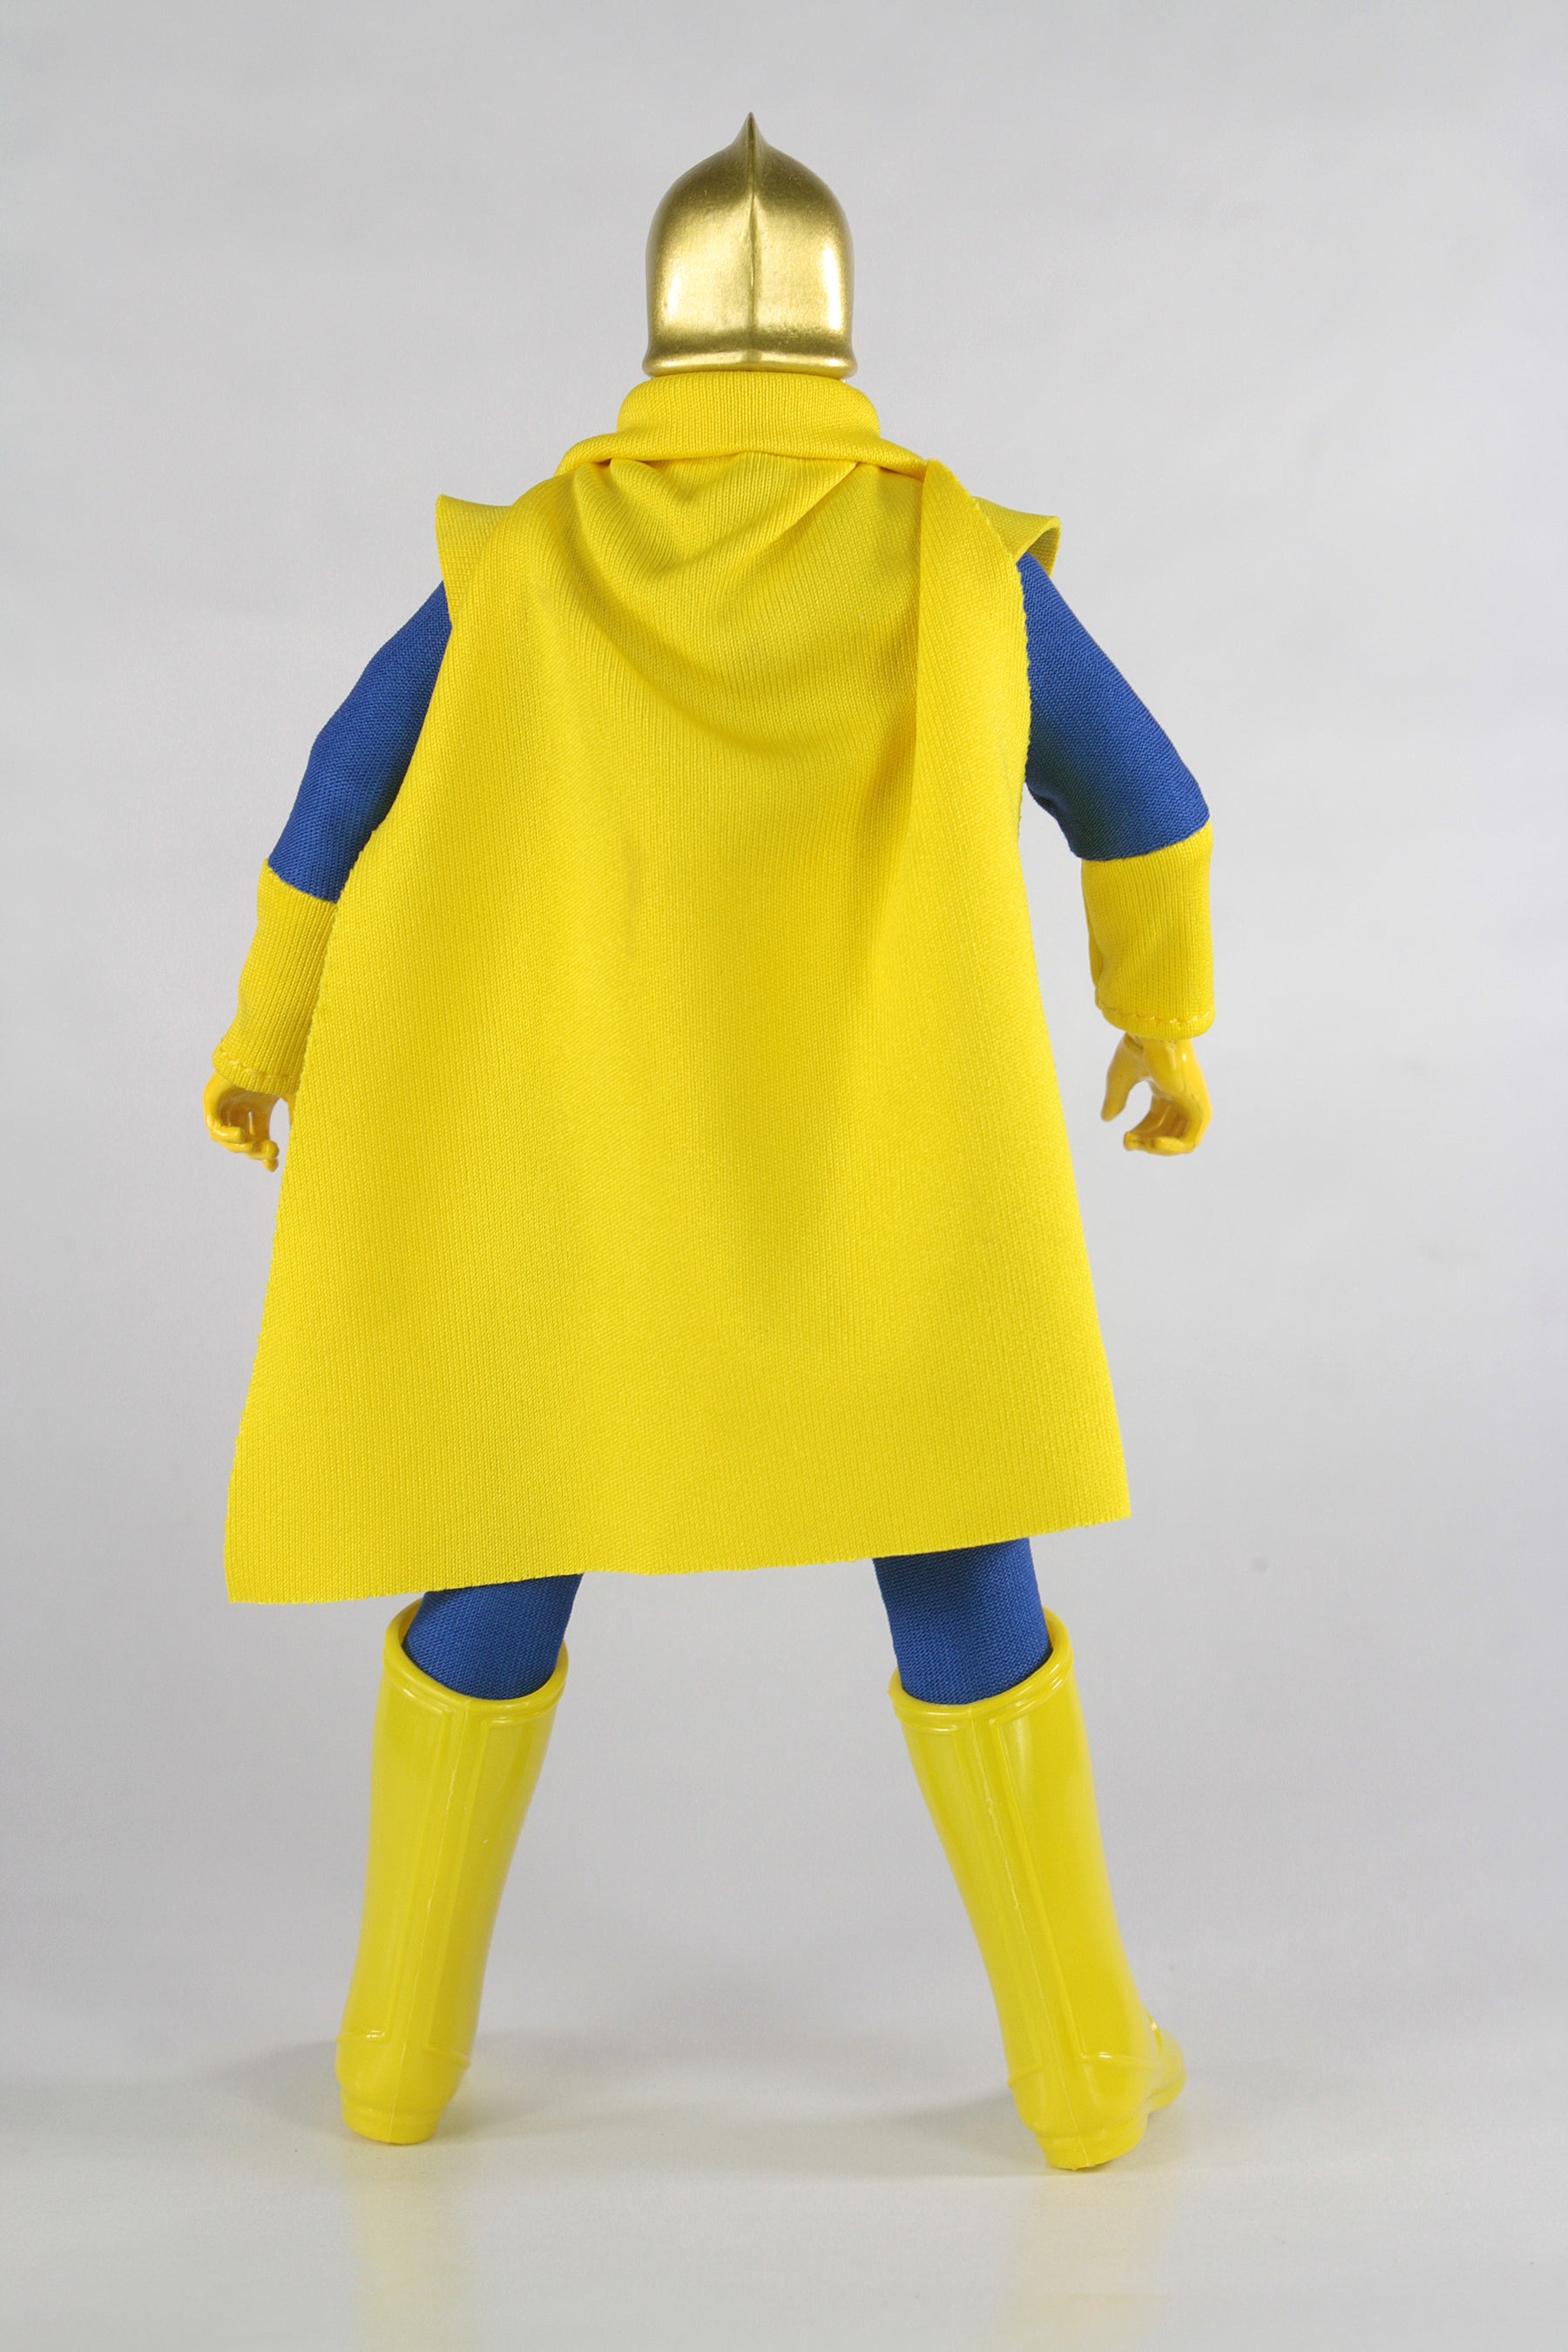 Mego Wave 18 - Dr. Fate 50th Anniversary World's Greatest Superheroes 8" Action Figure